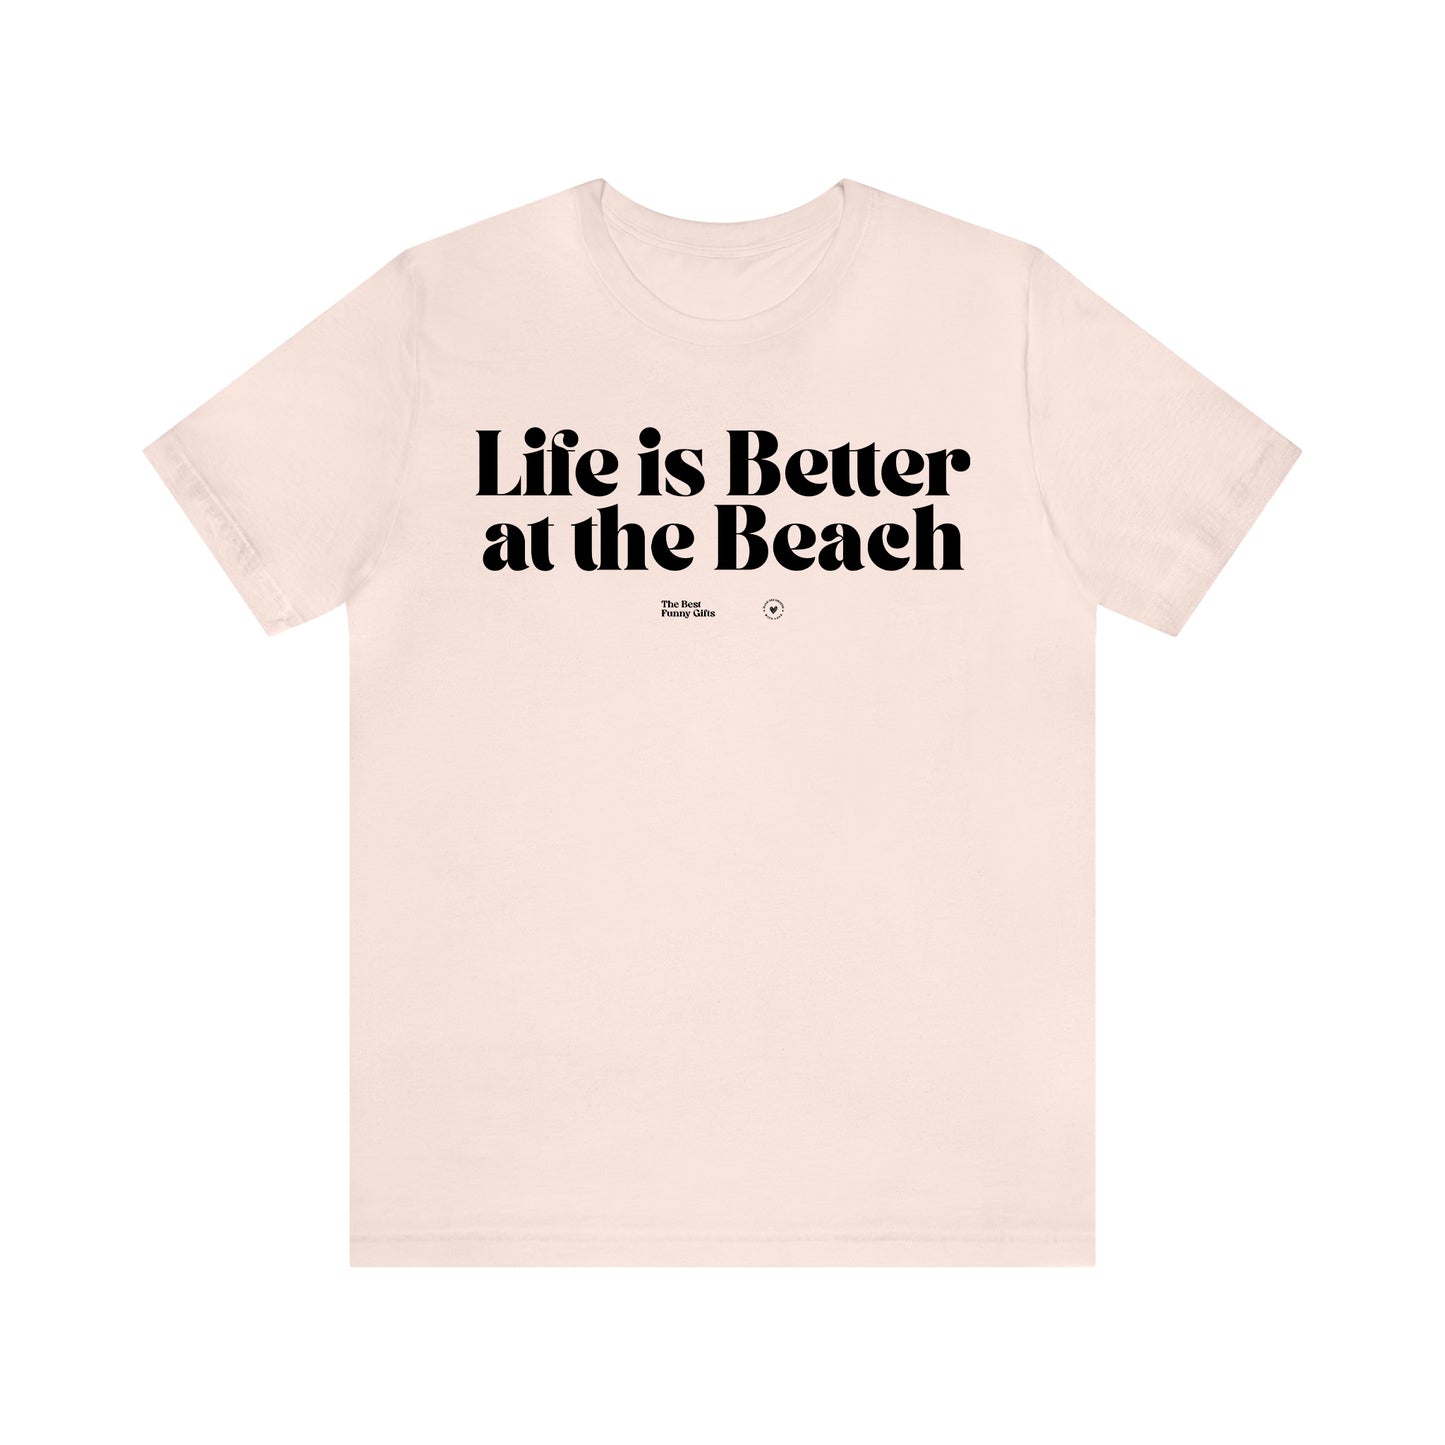 Funny Shirts for Women - Life is Better at the Beach - Women’s T Shirts